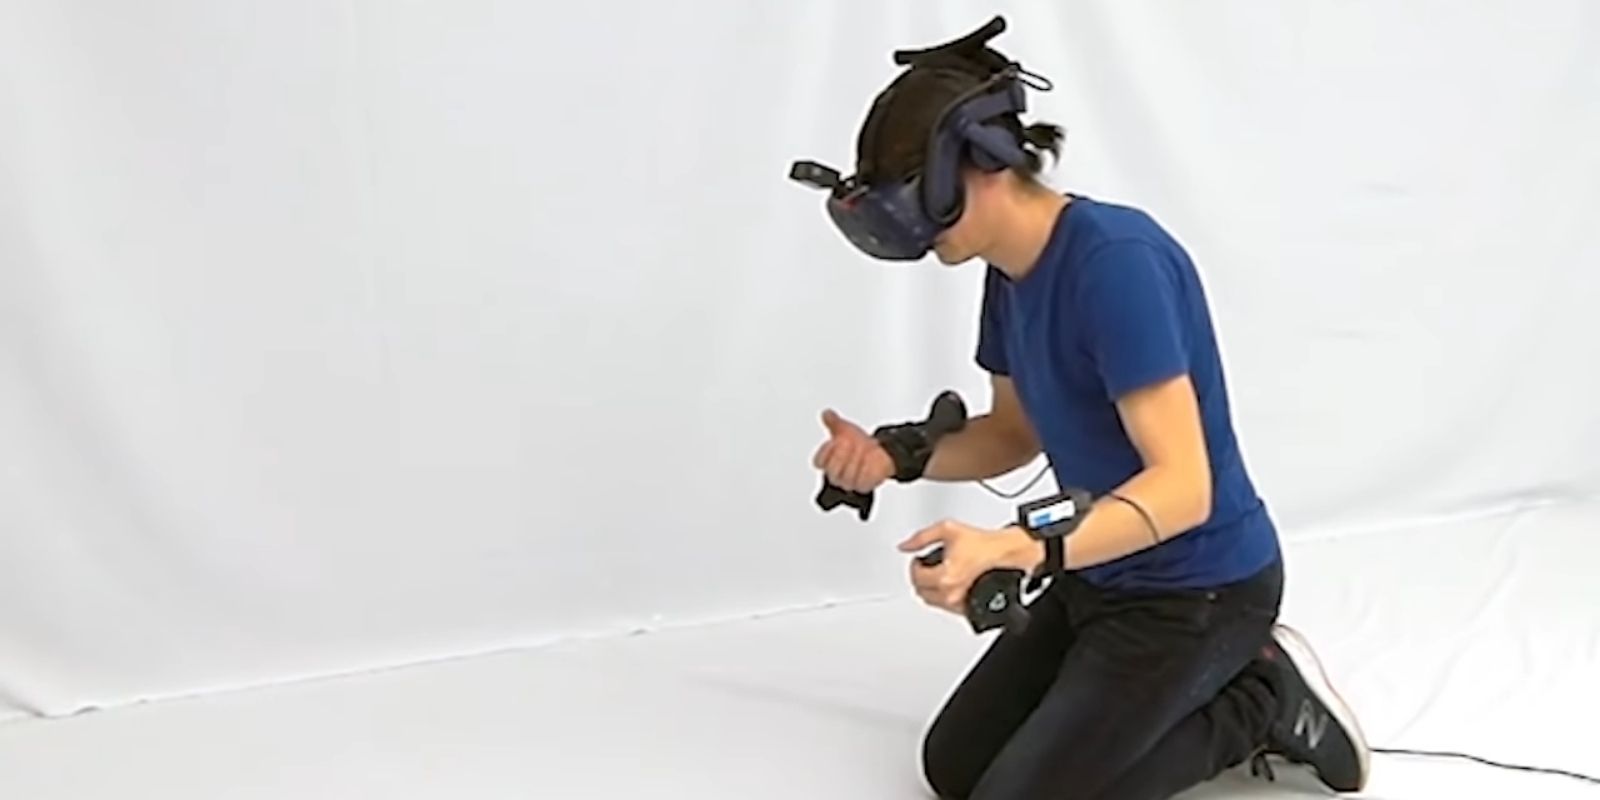 Microsoft Simulates Physical Contact In Vr Using ‘Haptic Pivot’ Controller